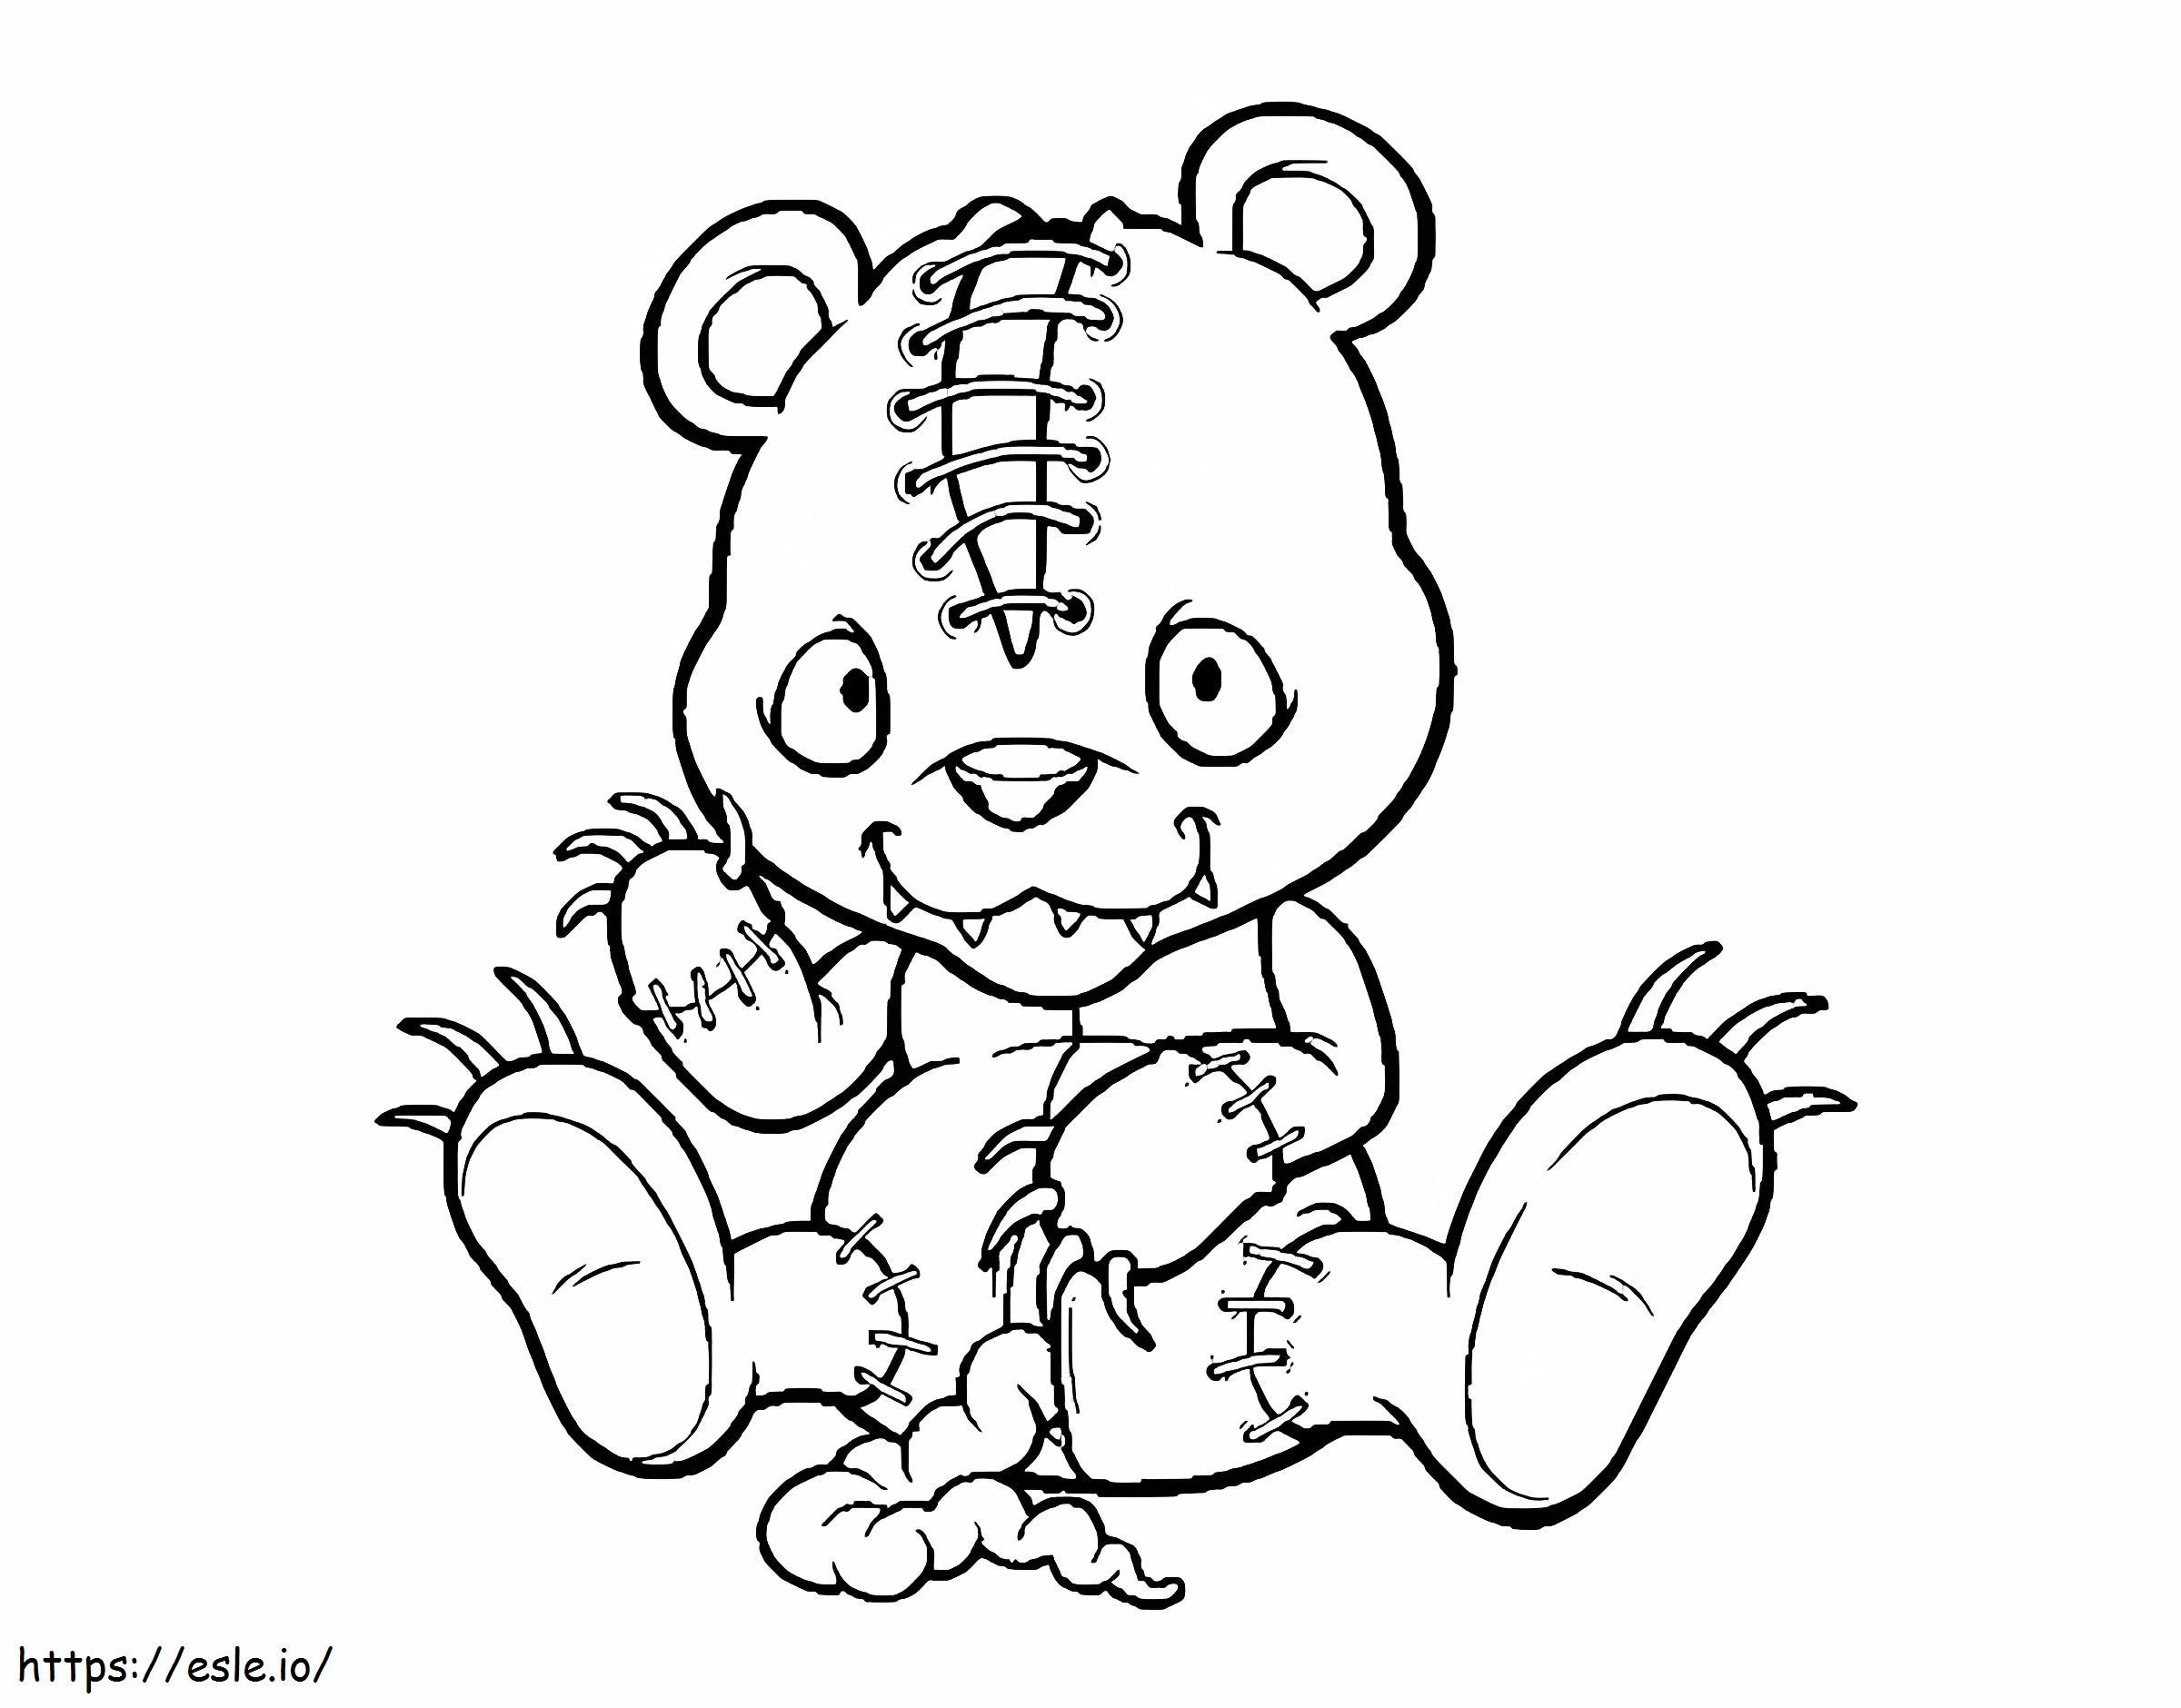 Scary Tattered Teddy coloring page